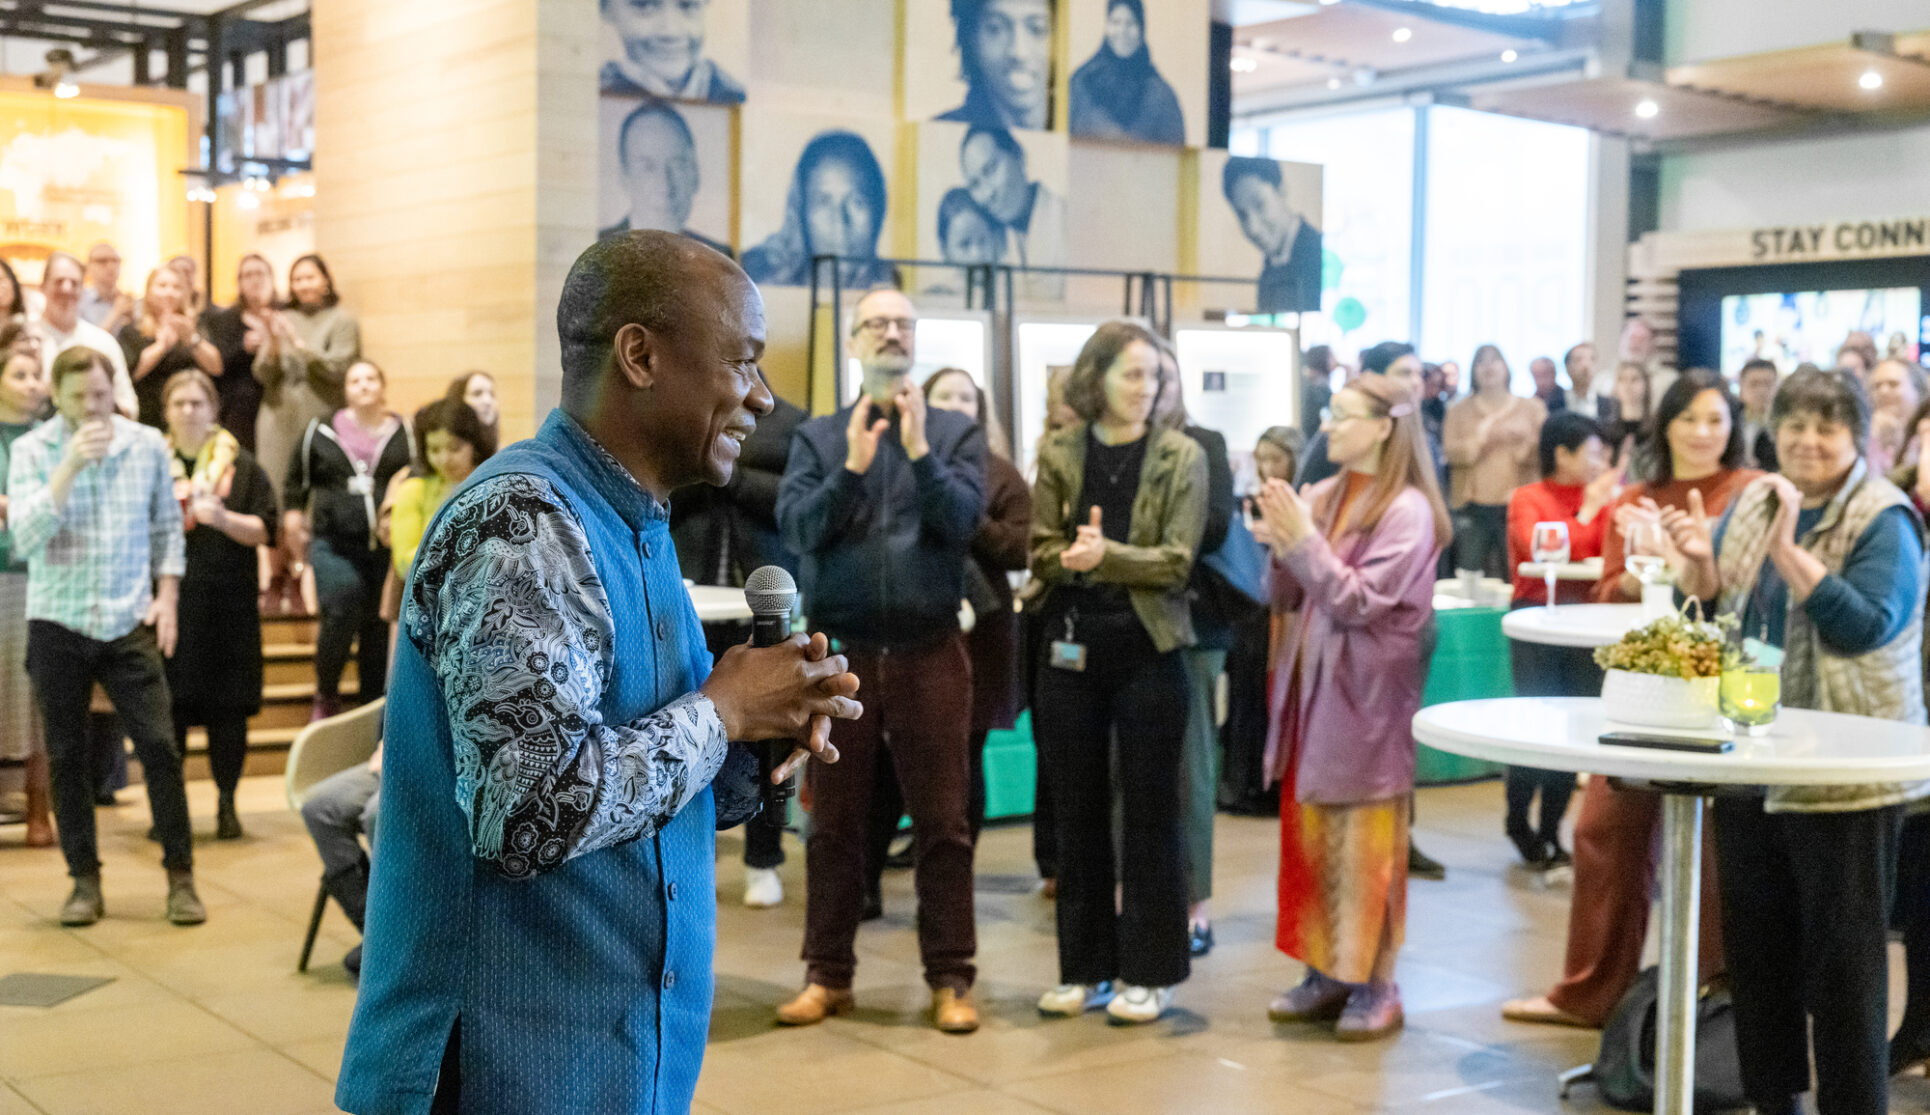 Doulaye Kone speaks to a crowd of guests at the Discovery Center.